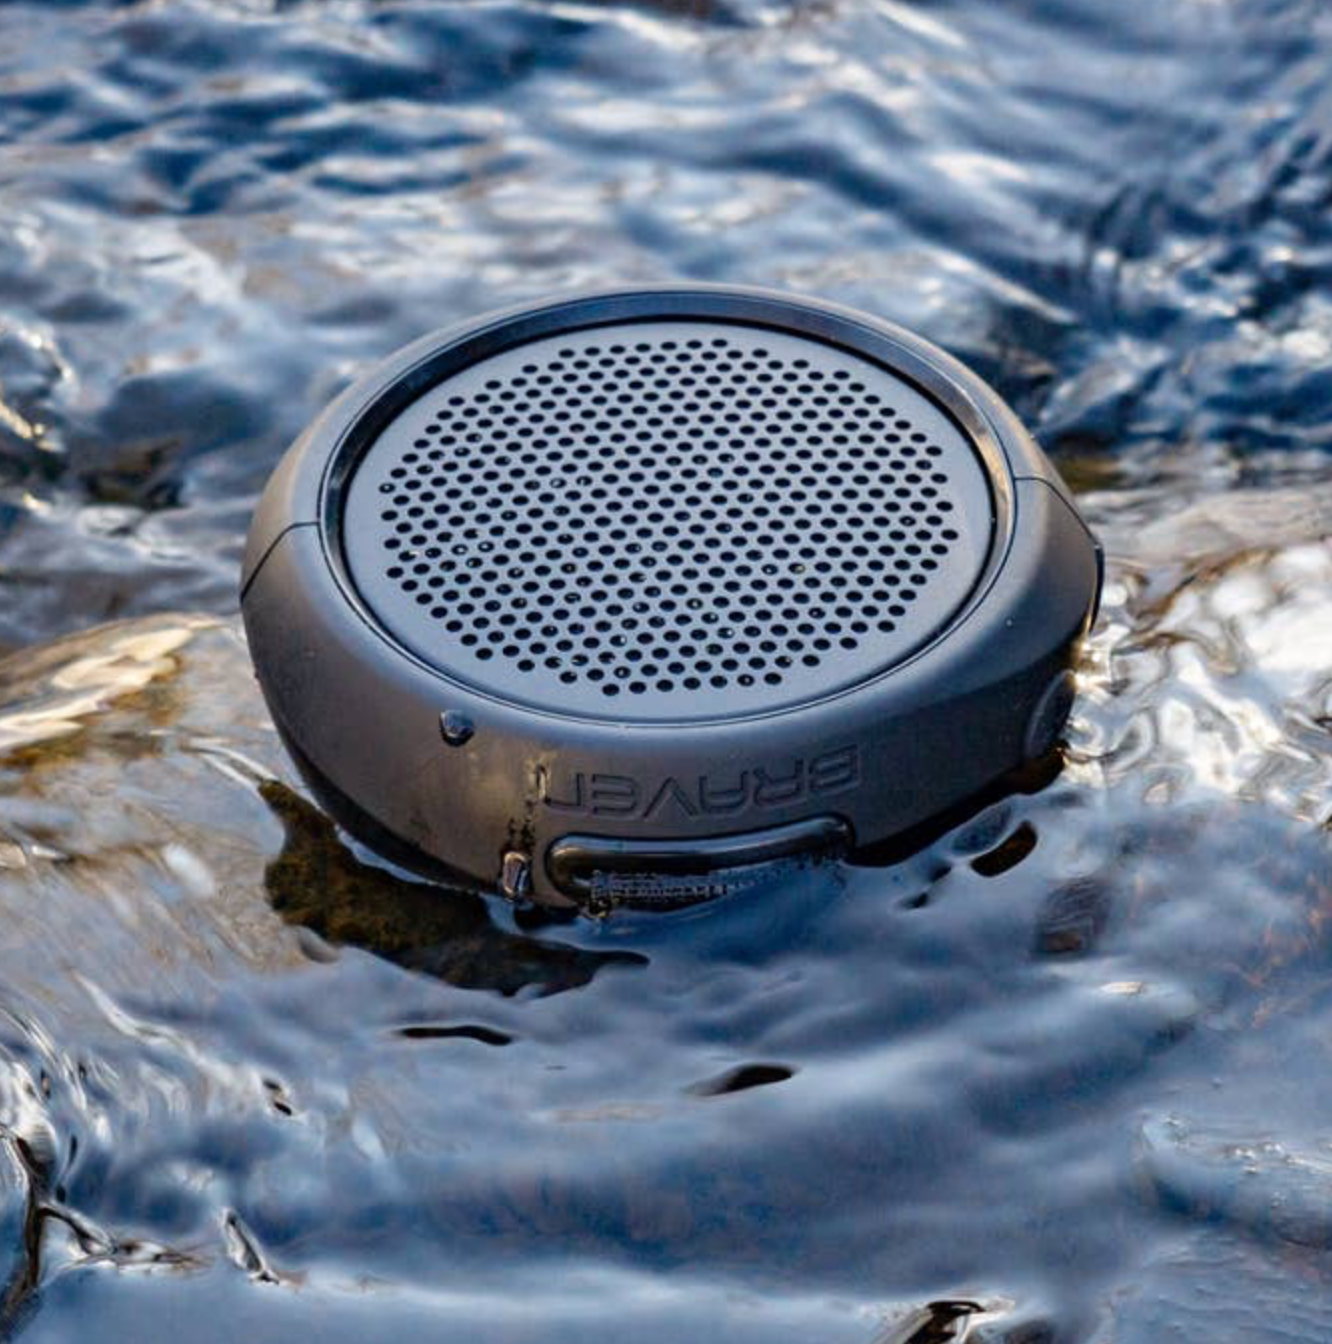  Braven 105 Wireless Portable Bluetooth Speaker  [Waterproof][Outdoor][8 Hour Playtime] with Action Mount/Stand - Black :  Electronics